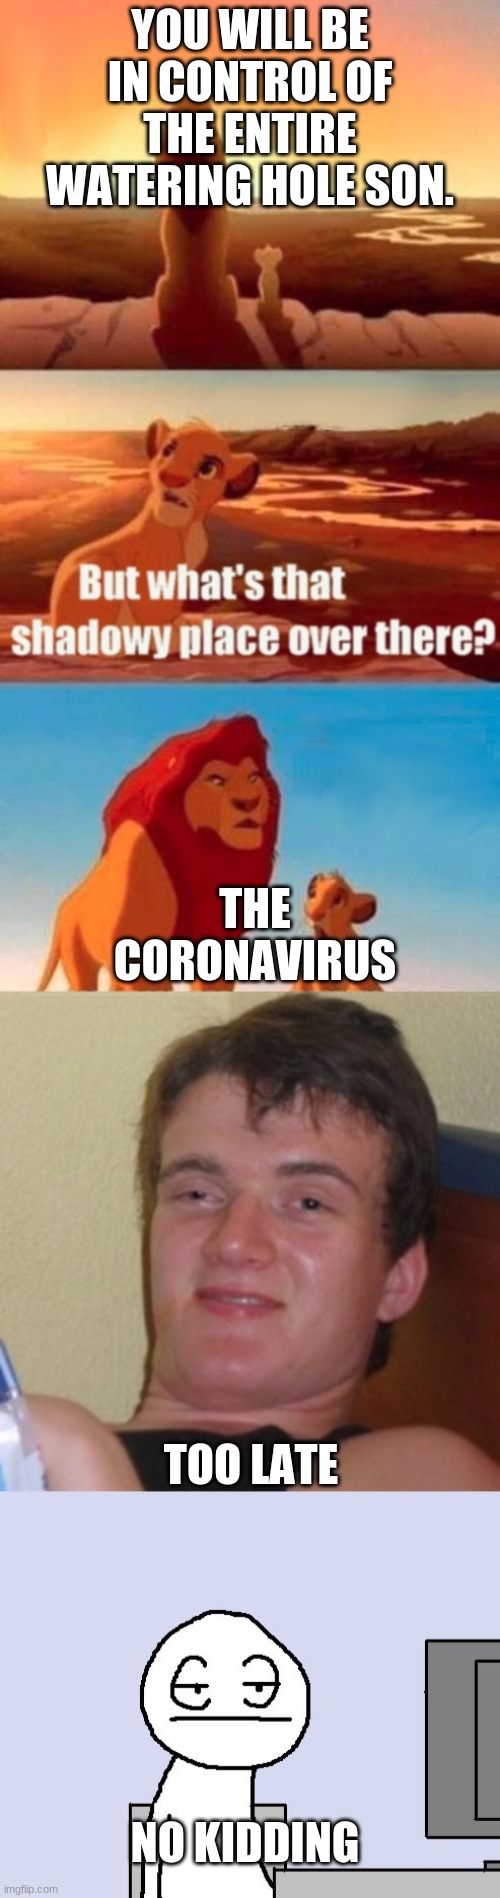 It's all Simba's fault. | YOU WILL BE IN CONTROL OF THE ENTIRE WATERING HOLE SON. THE CORONAVIRUS; TOO LATE; NO KIDDING | image tagged in memes,simba shadowy place,high/drunk guy,bored of this crap,sully groan | made w/ Imgflip meme maker